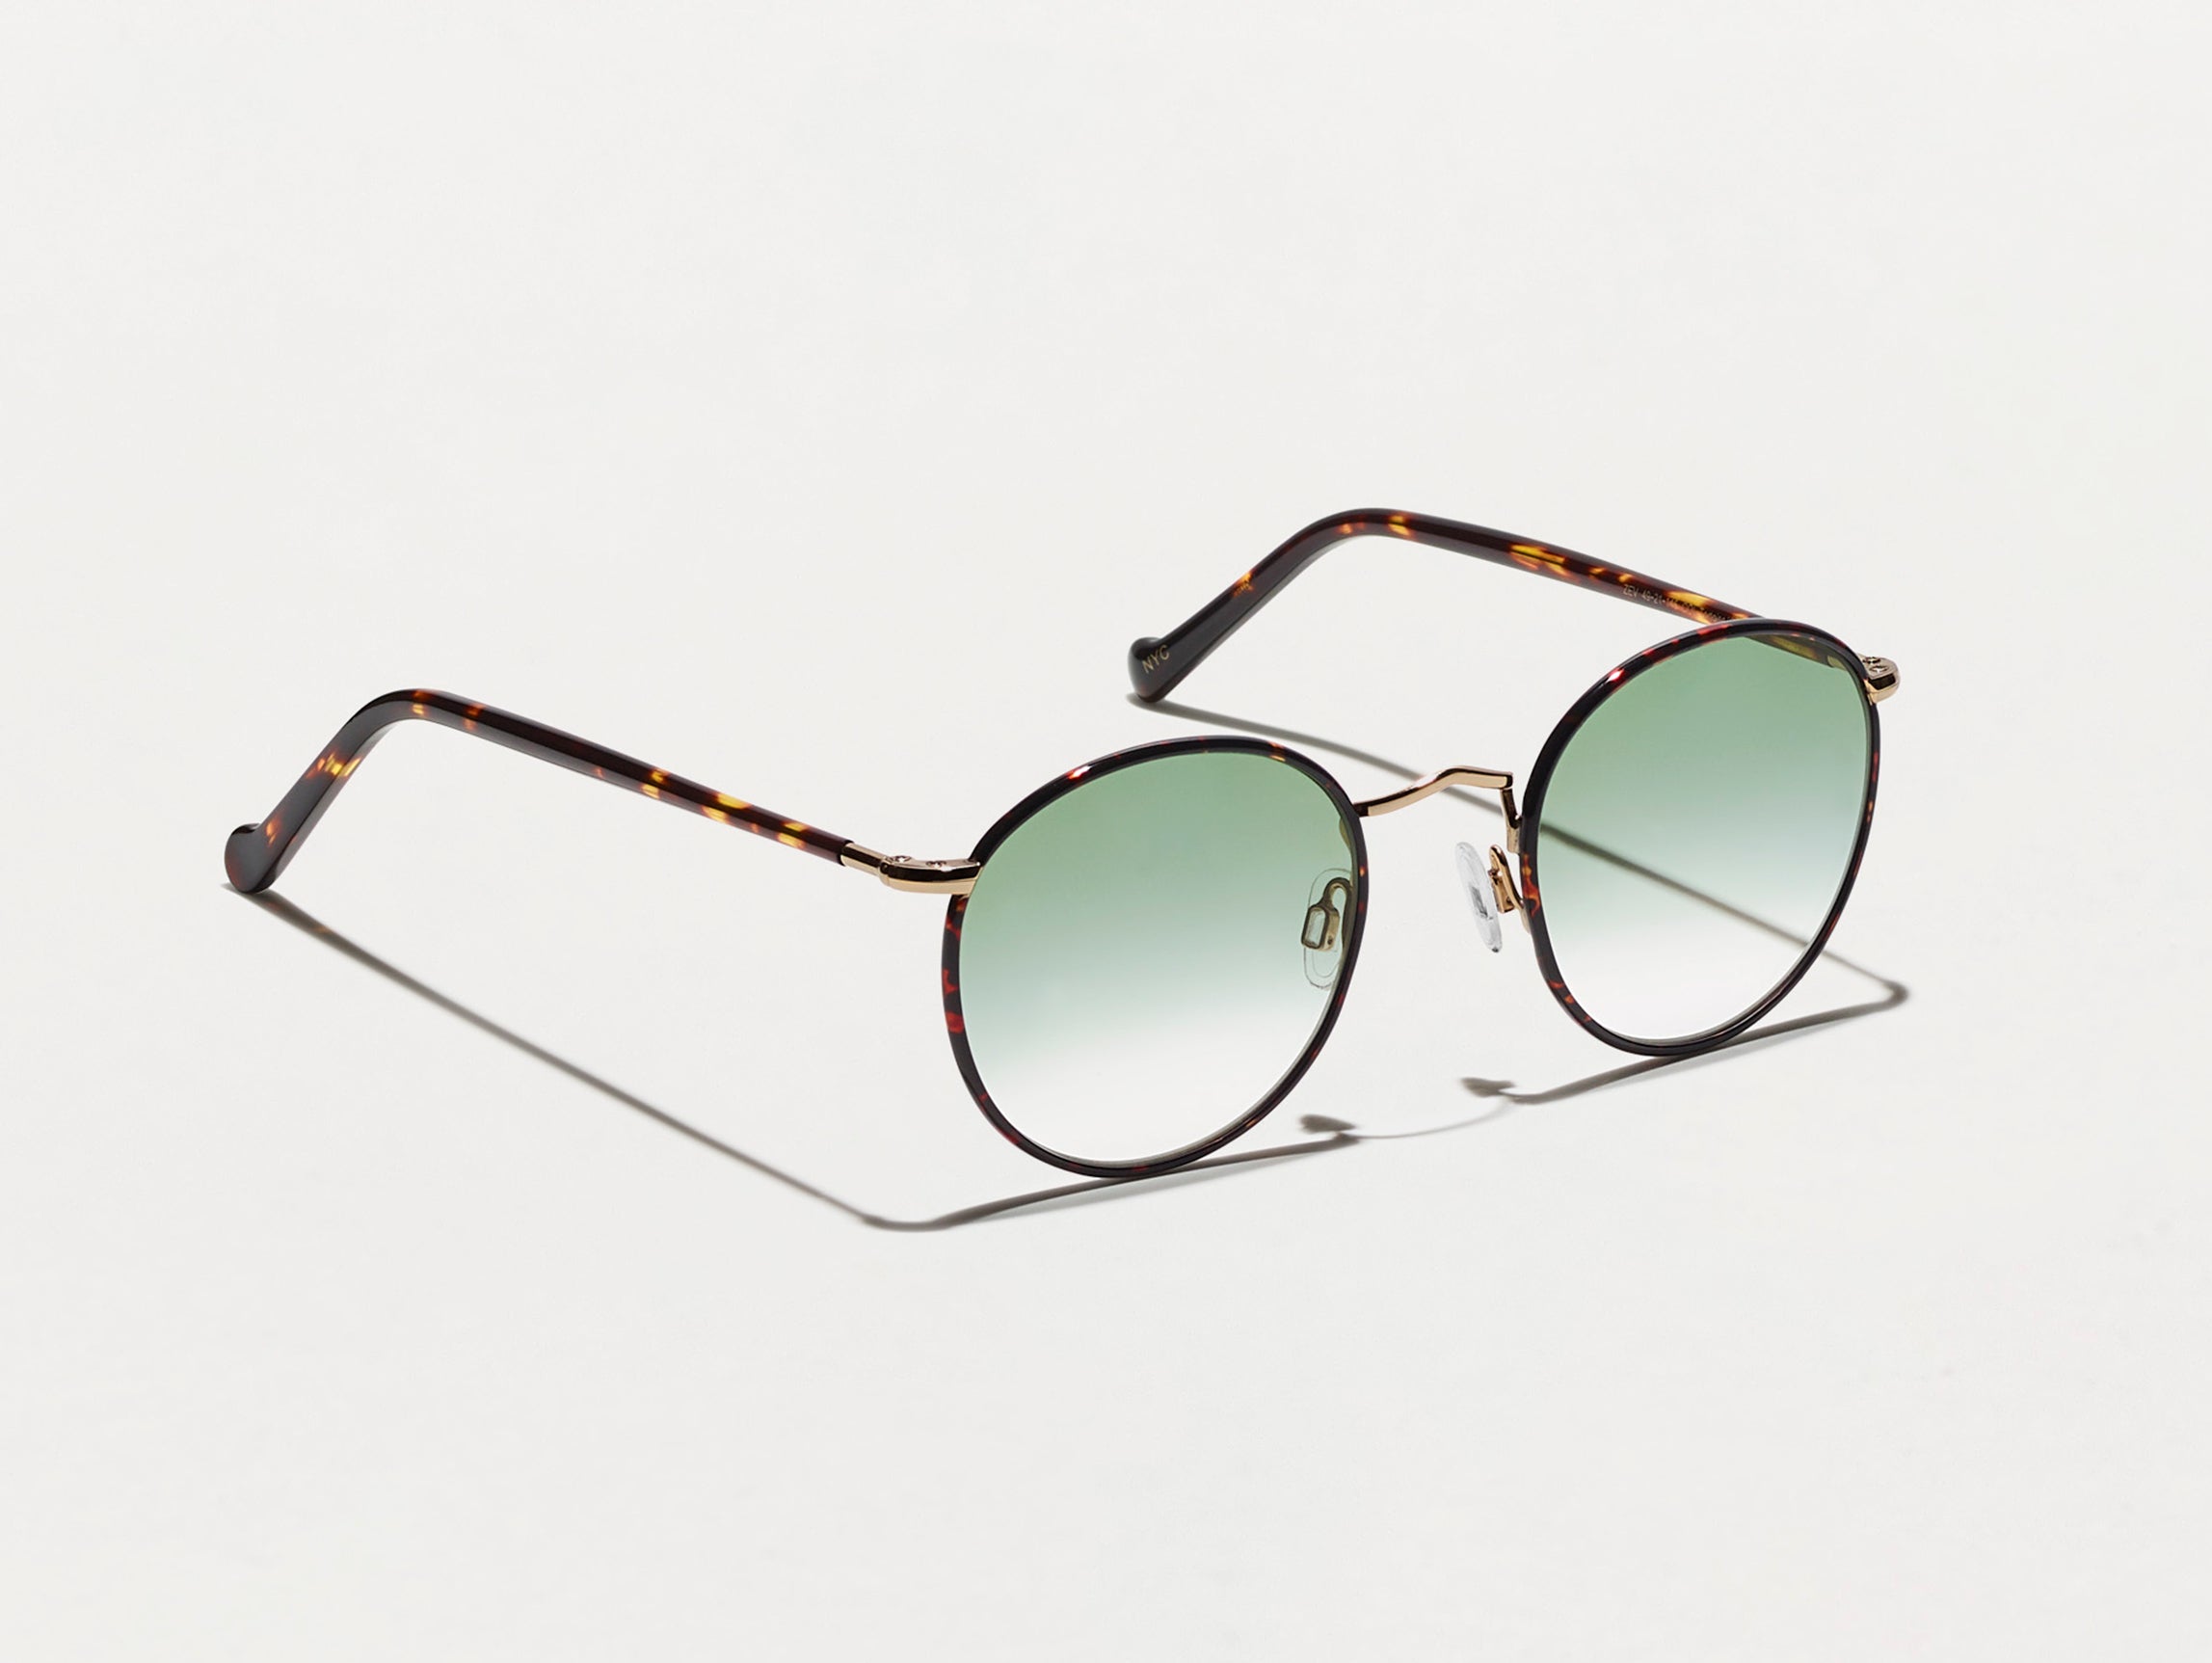 #color_g-15 fade | The ZEV in Tortoise in G-15 Fade Tinted Lenses